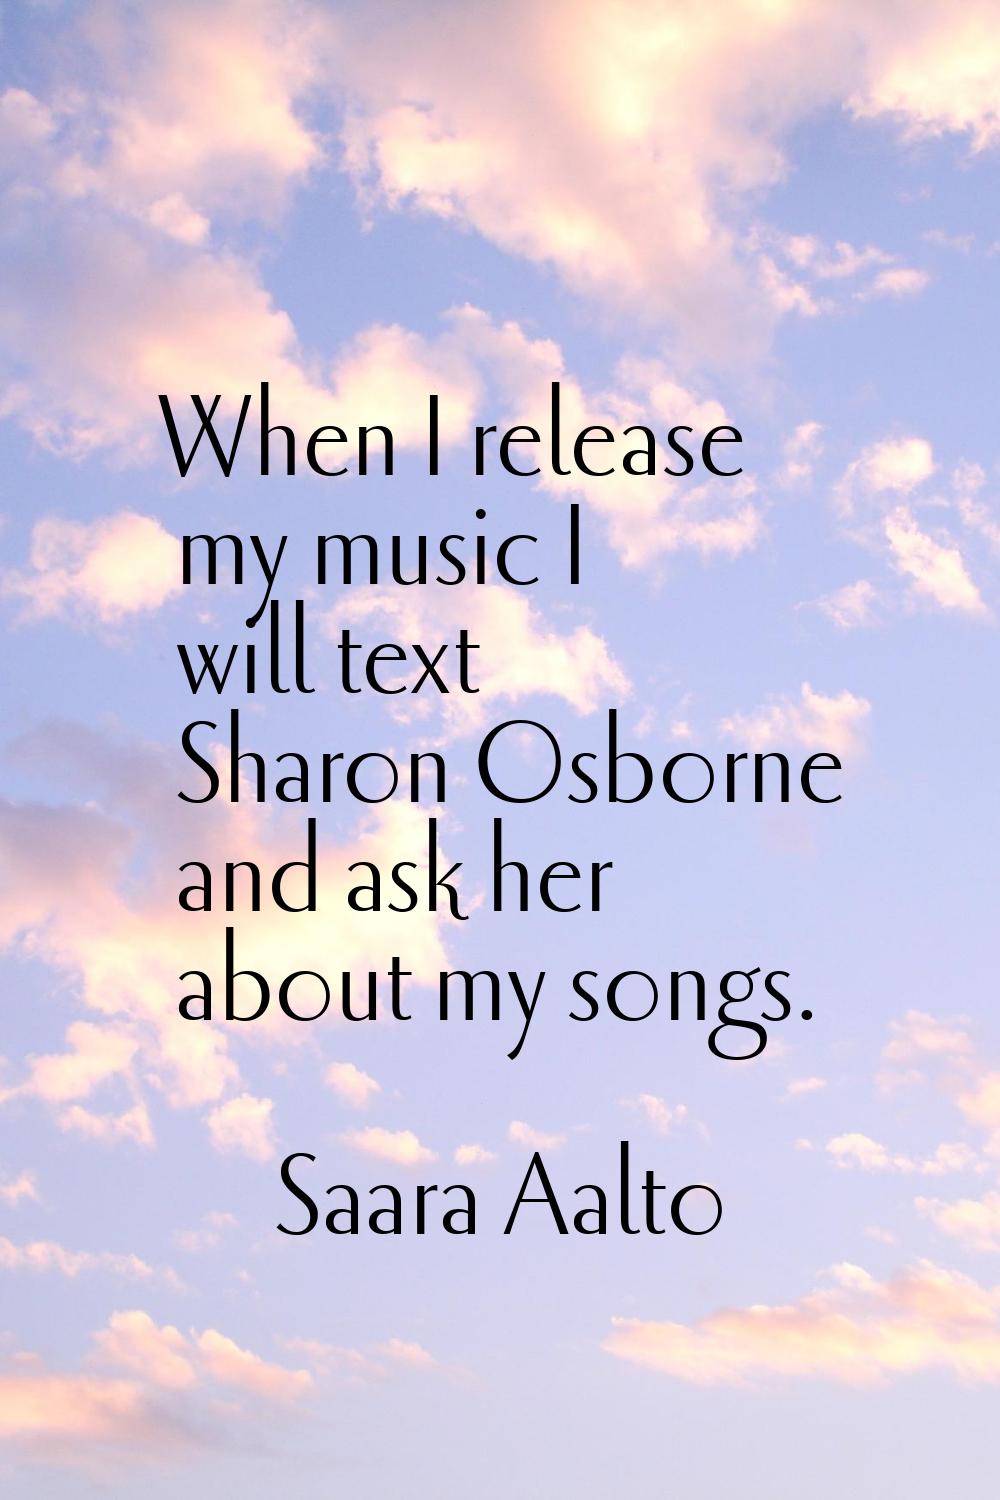 When I release my music I will text Sharon Osborne and ask her about my songs.